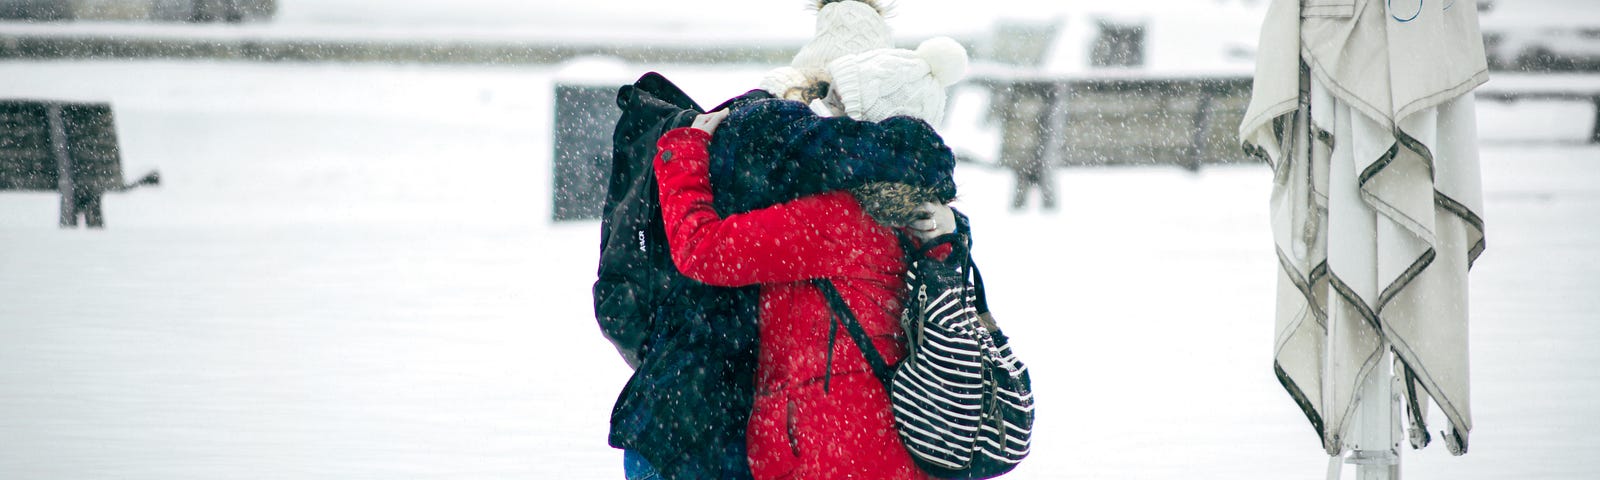 Two people hugging in the snow.